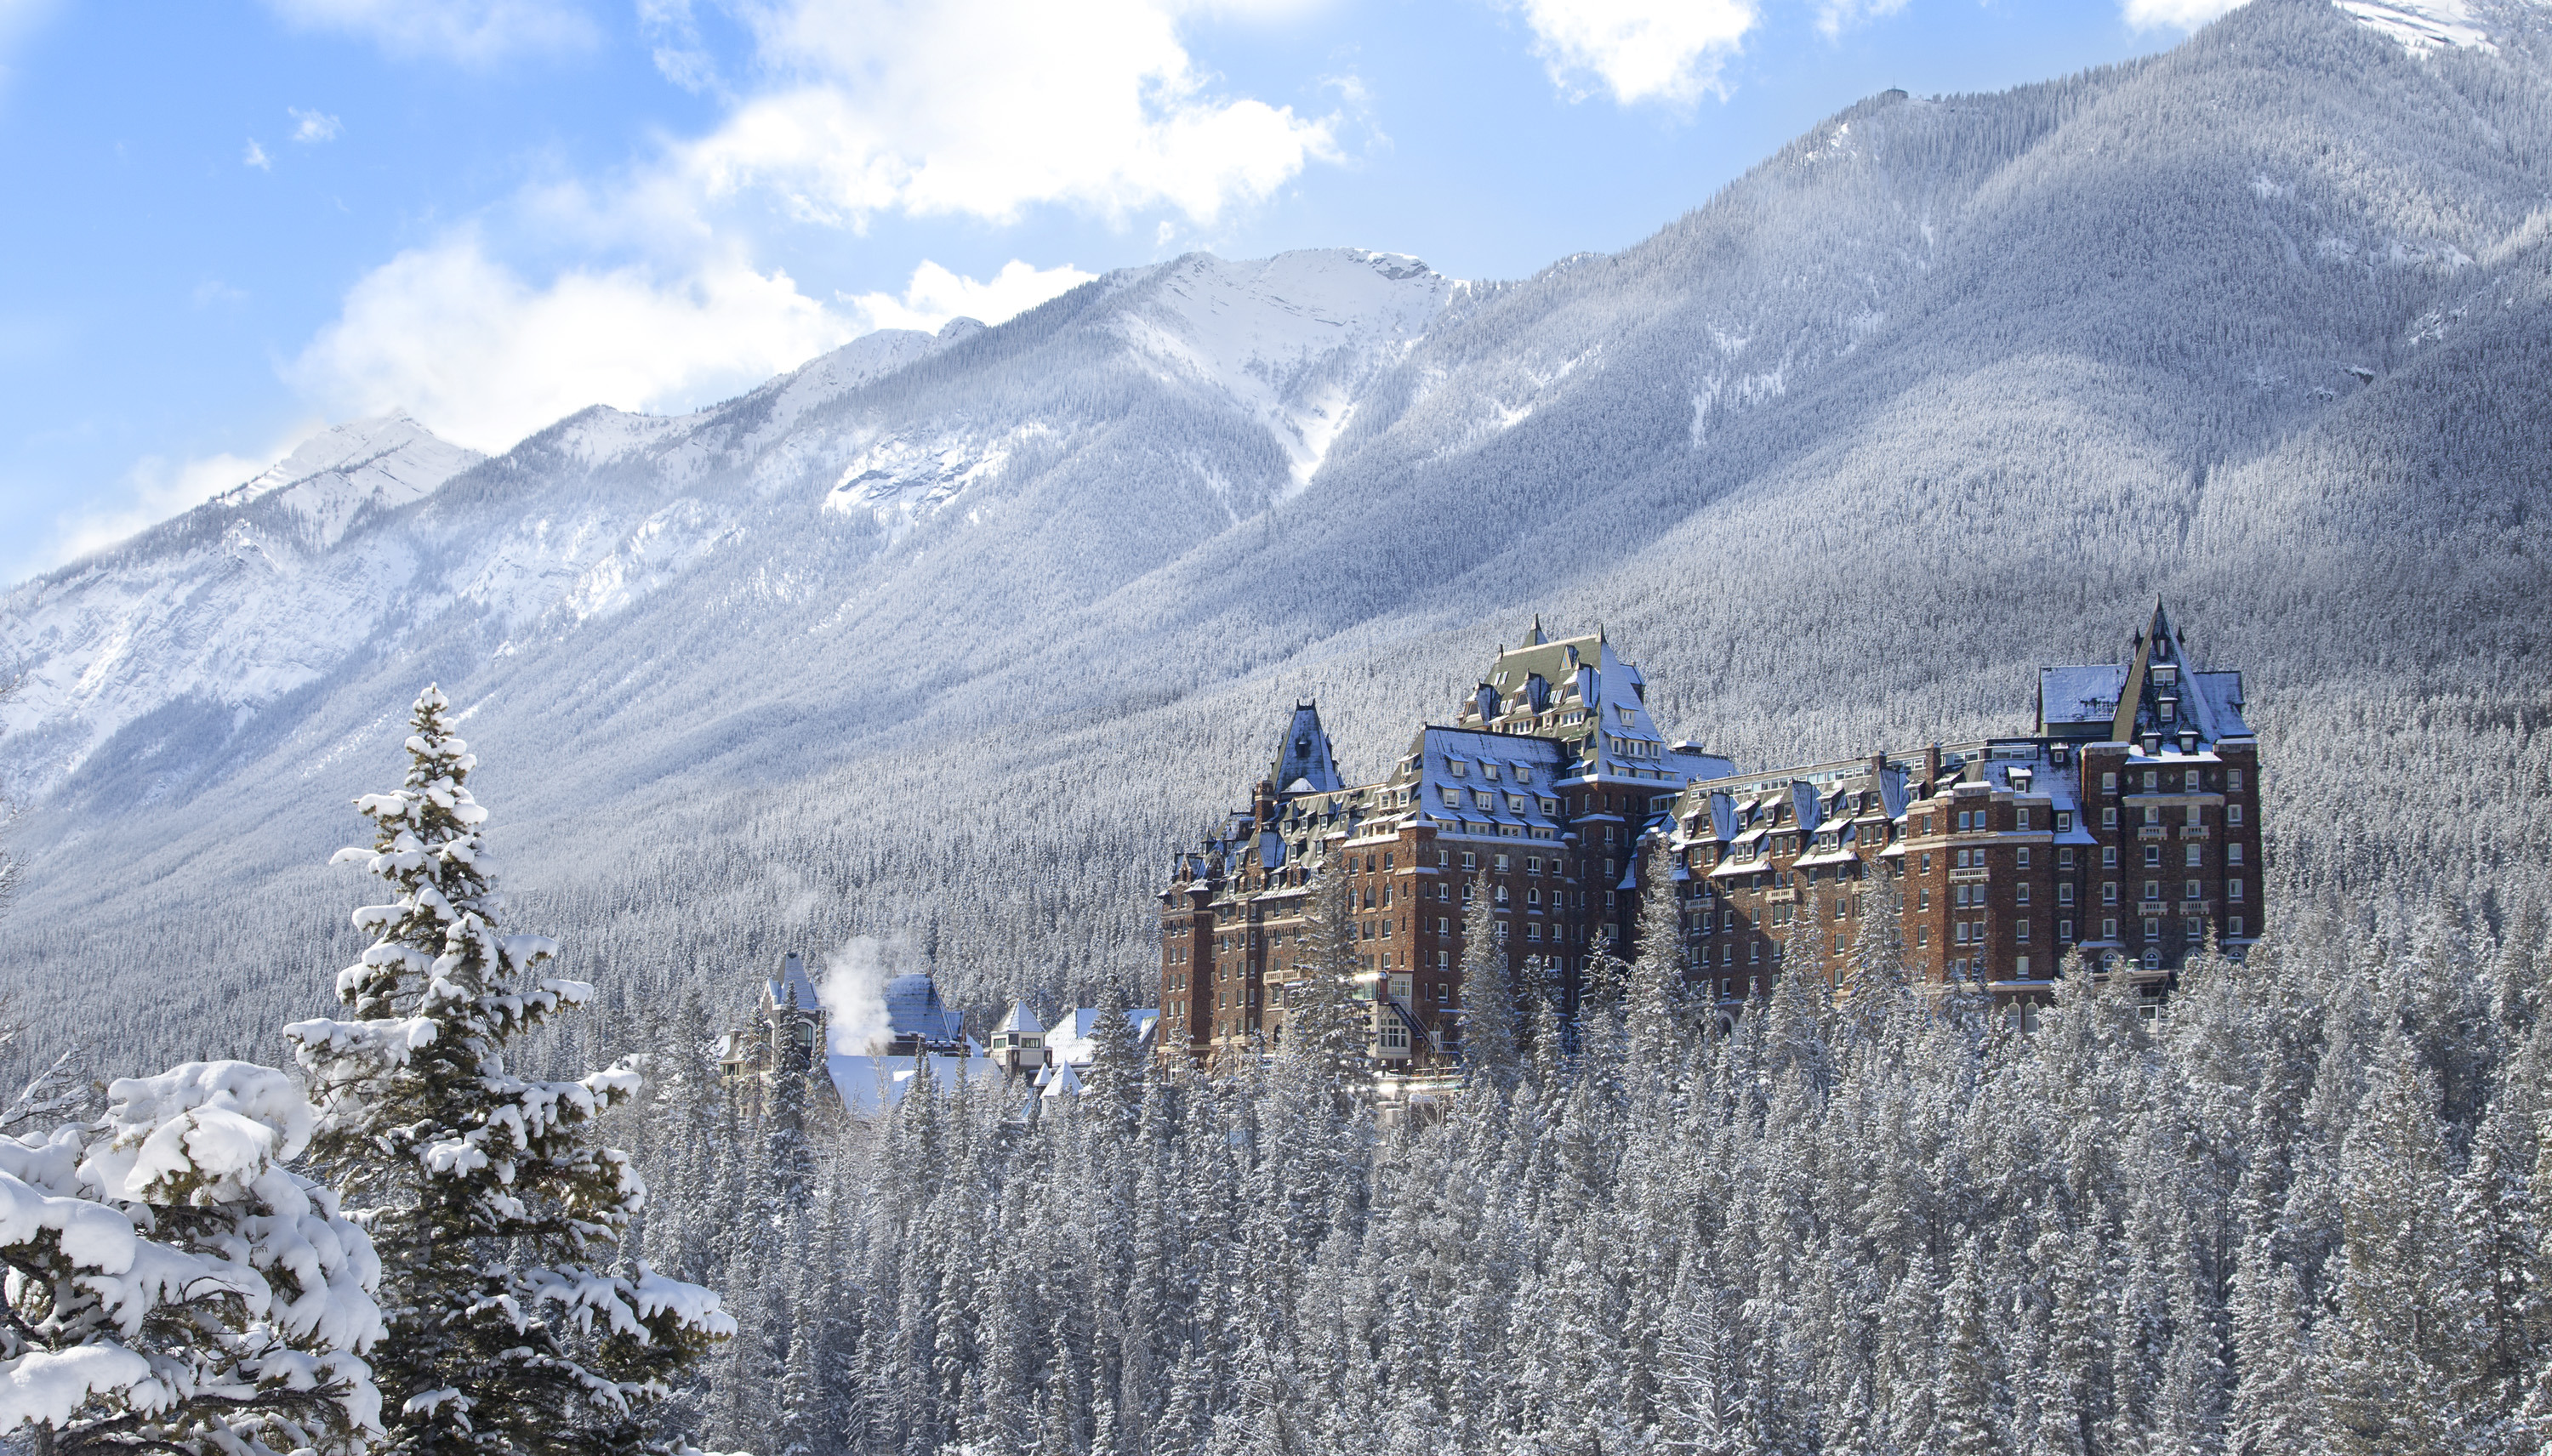 Ski Vacation Package - Save 20-30% at the Fairmont Banff Springs and Chateau Lake Louise! Book by November 30th